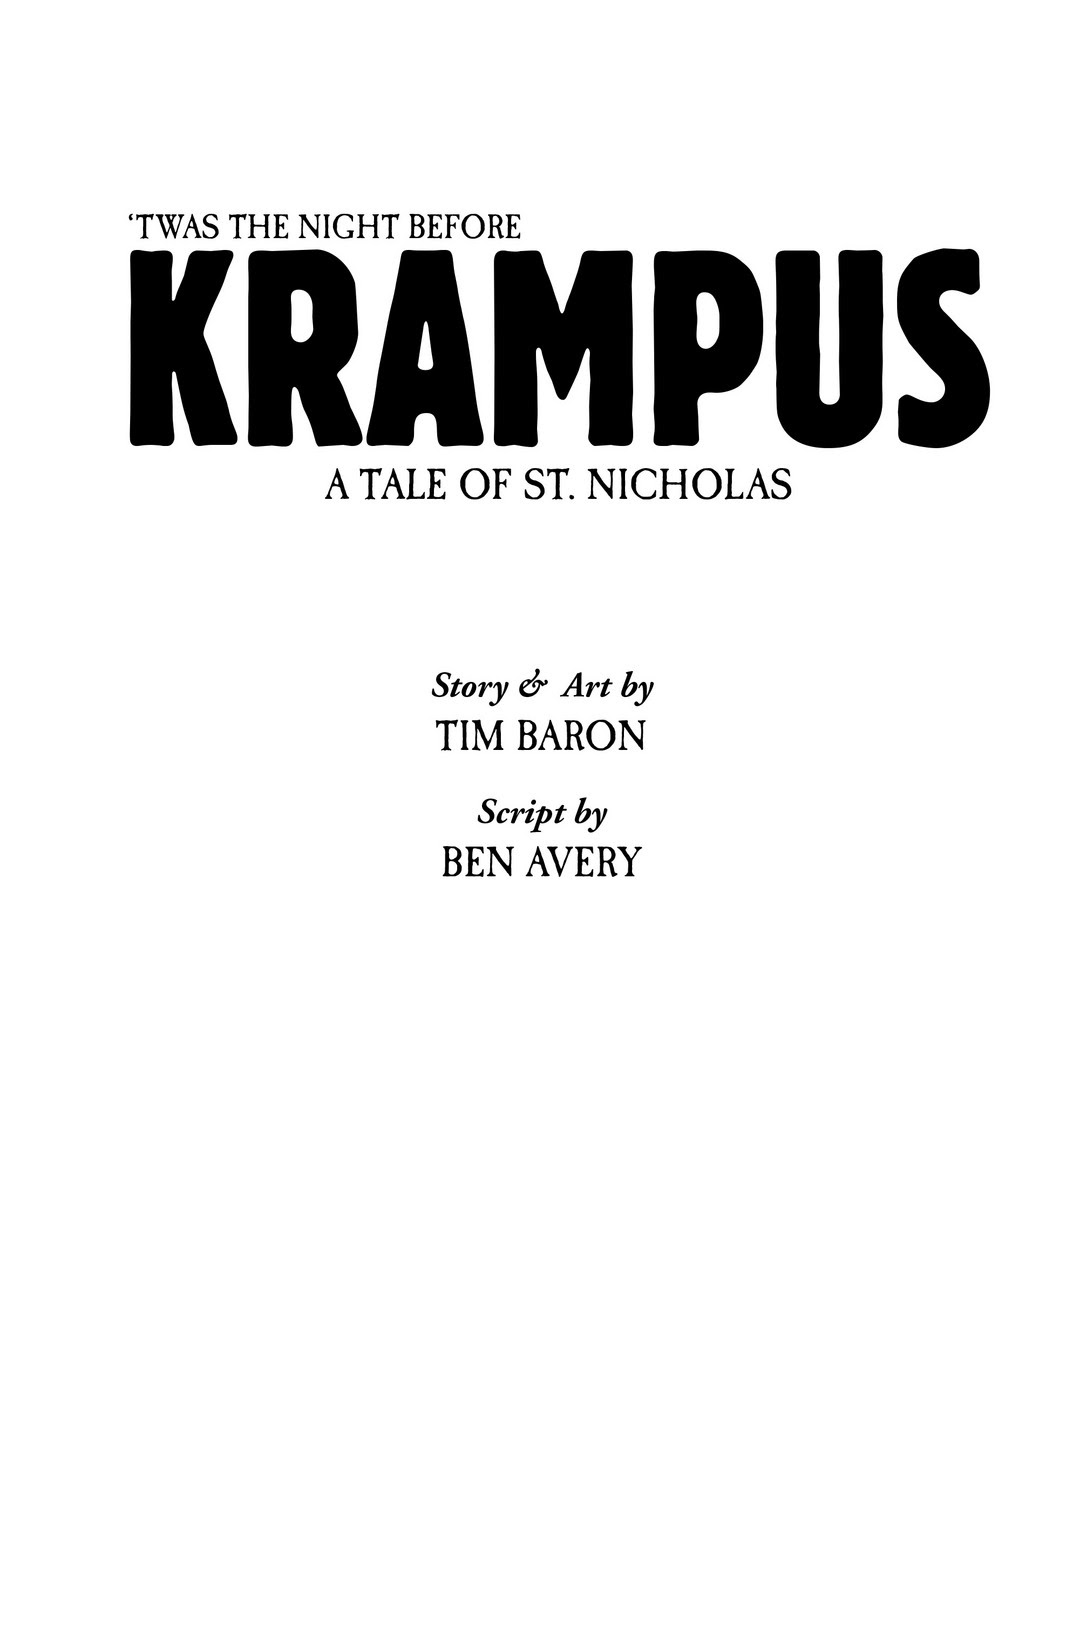 Read online 'Twas the Night Before Krampus comic -  Issue # Full - 4